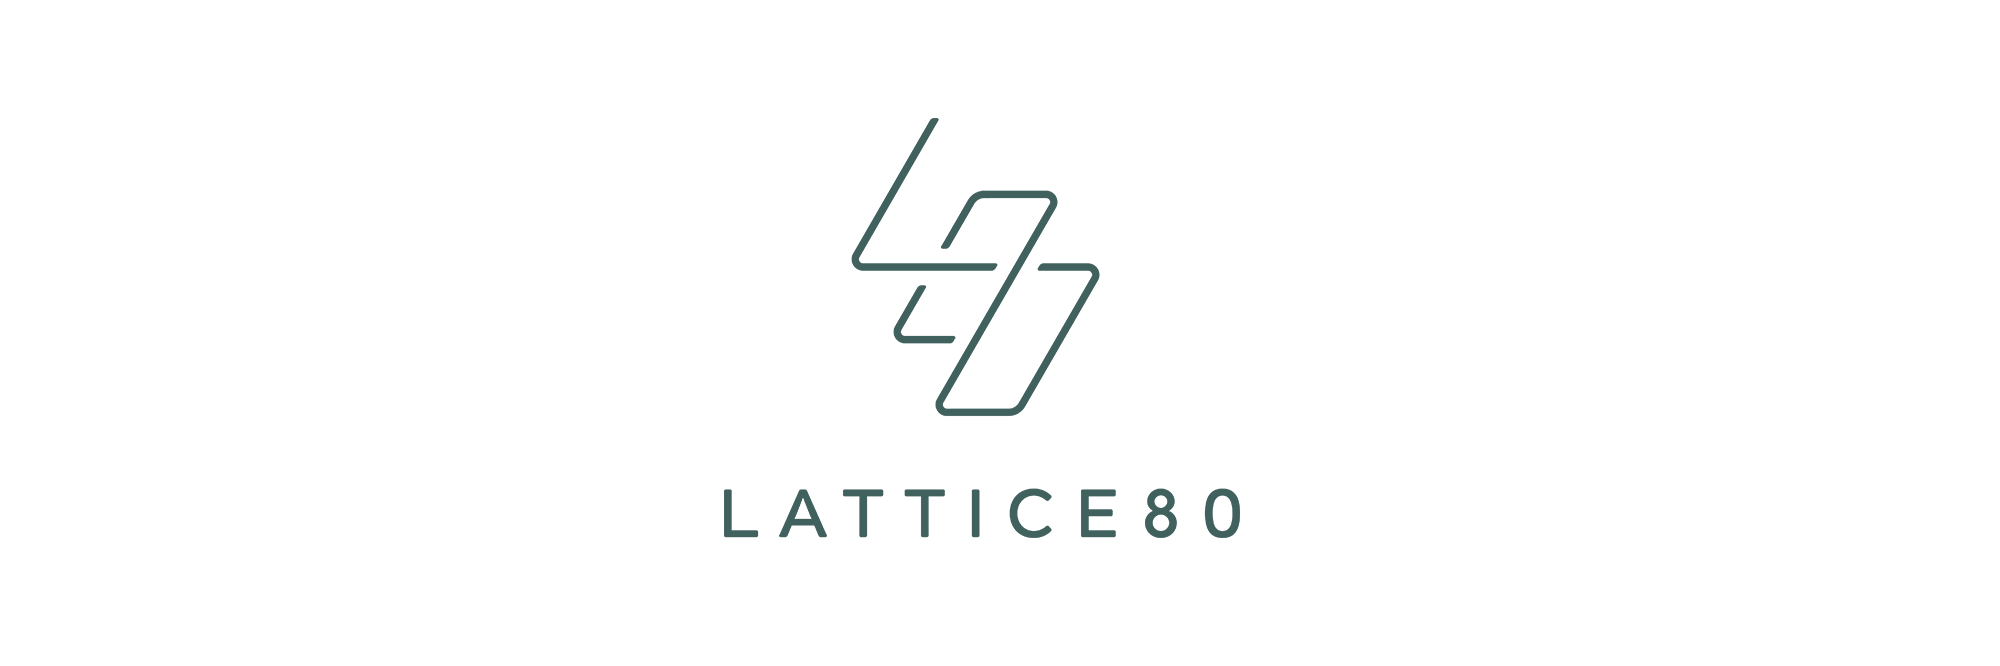 lattice80 influencers fintech middle east.png